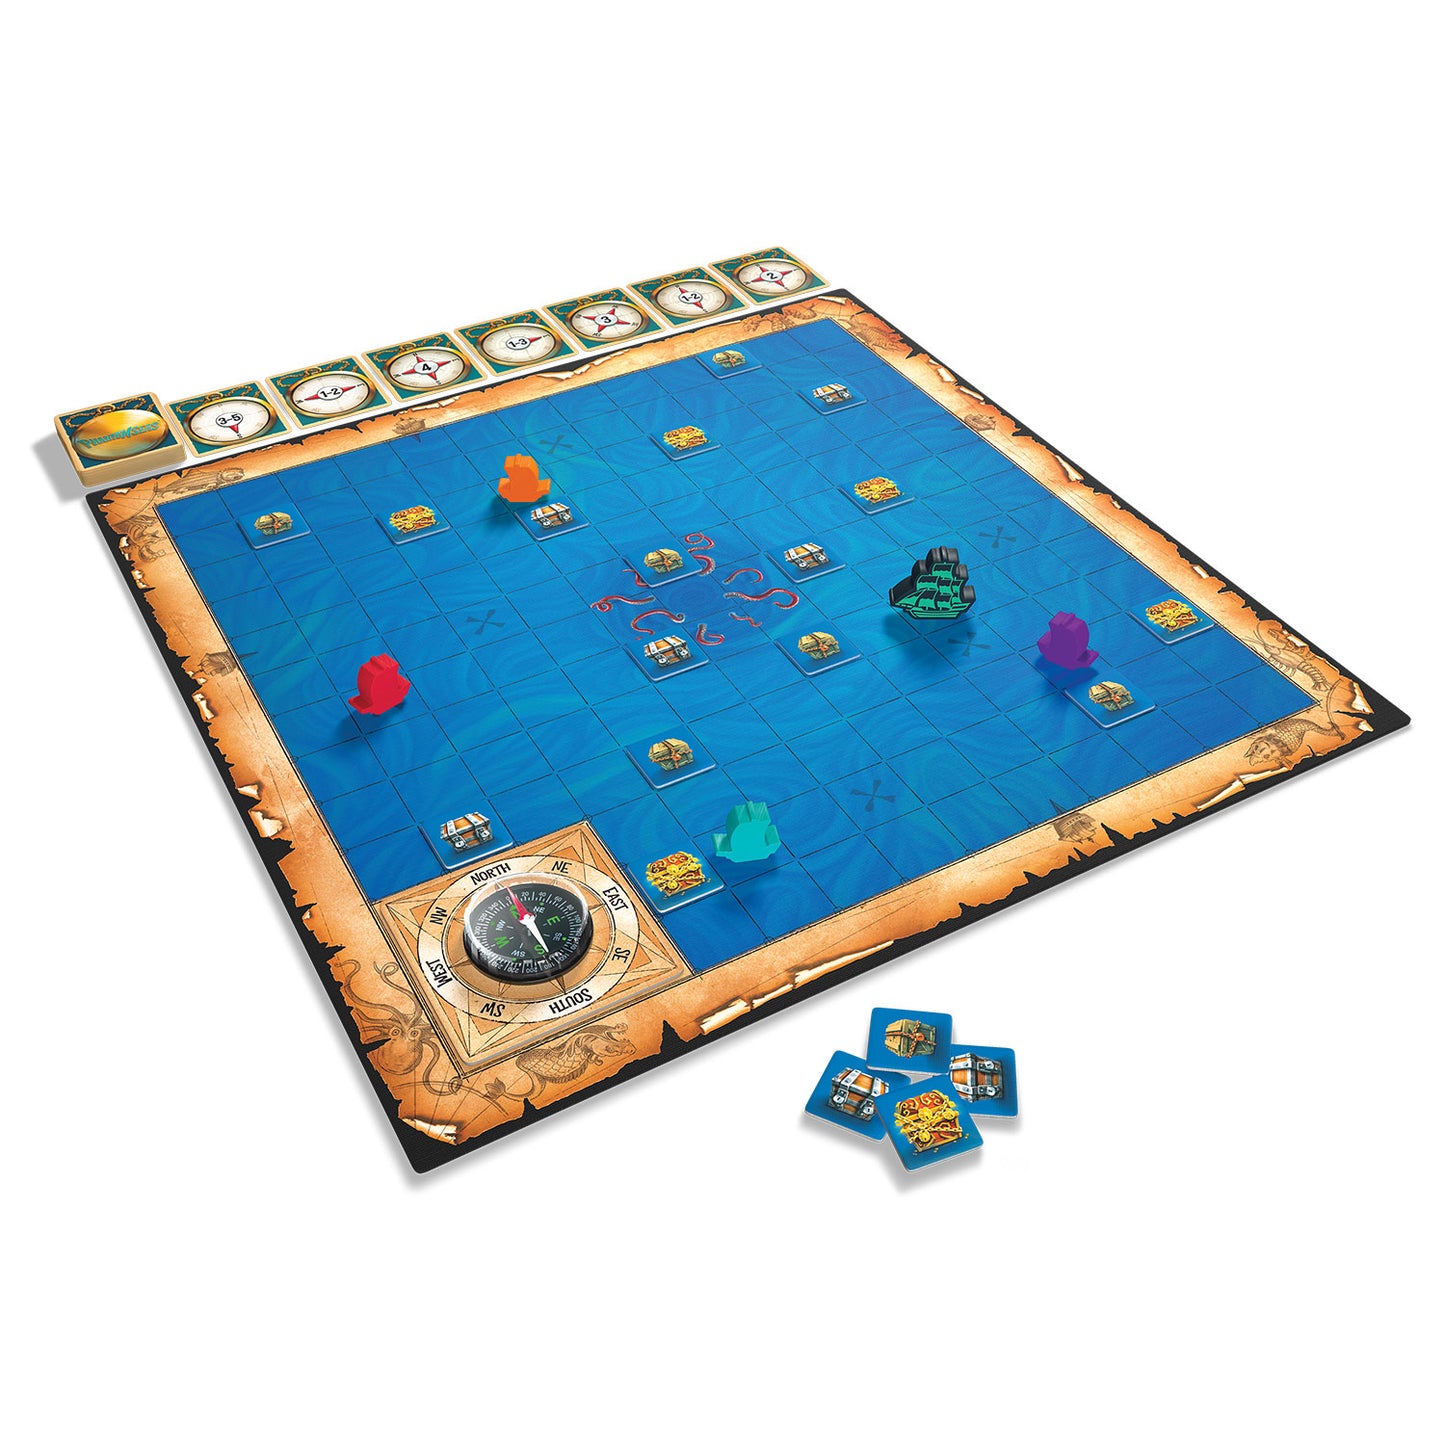 Phantom Seas: Compass and navigation board game with pirate ships